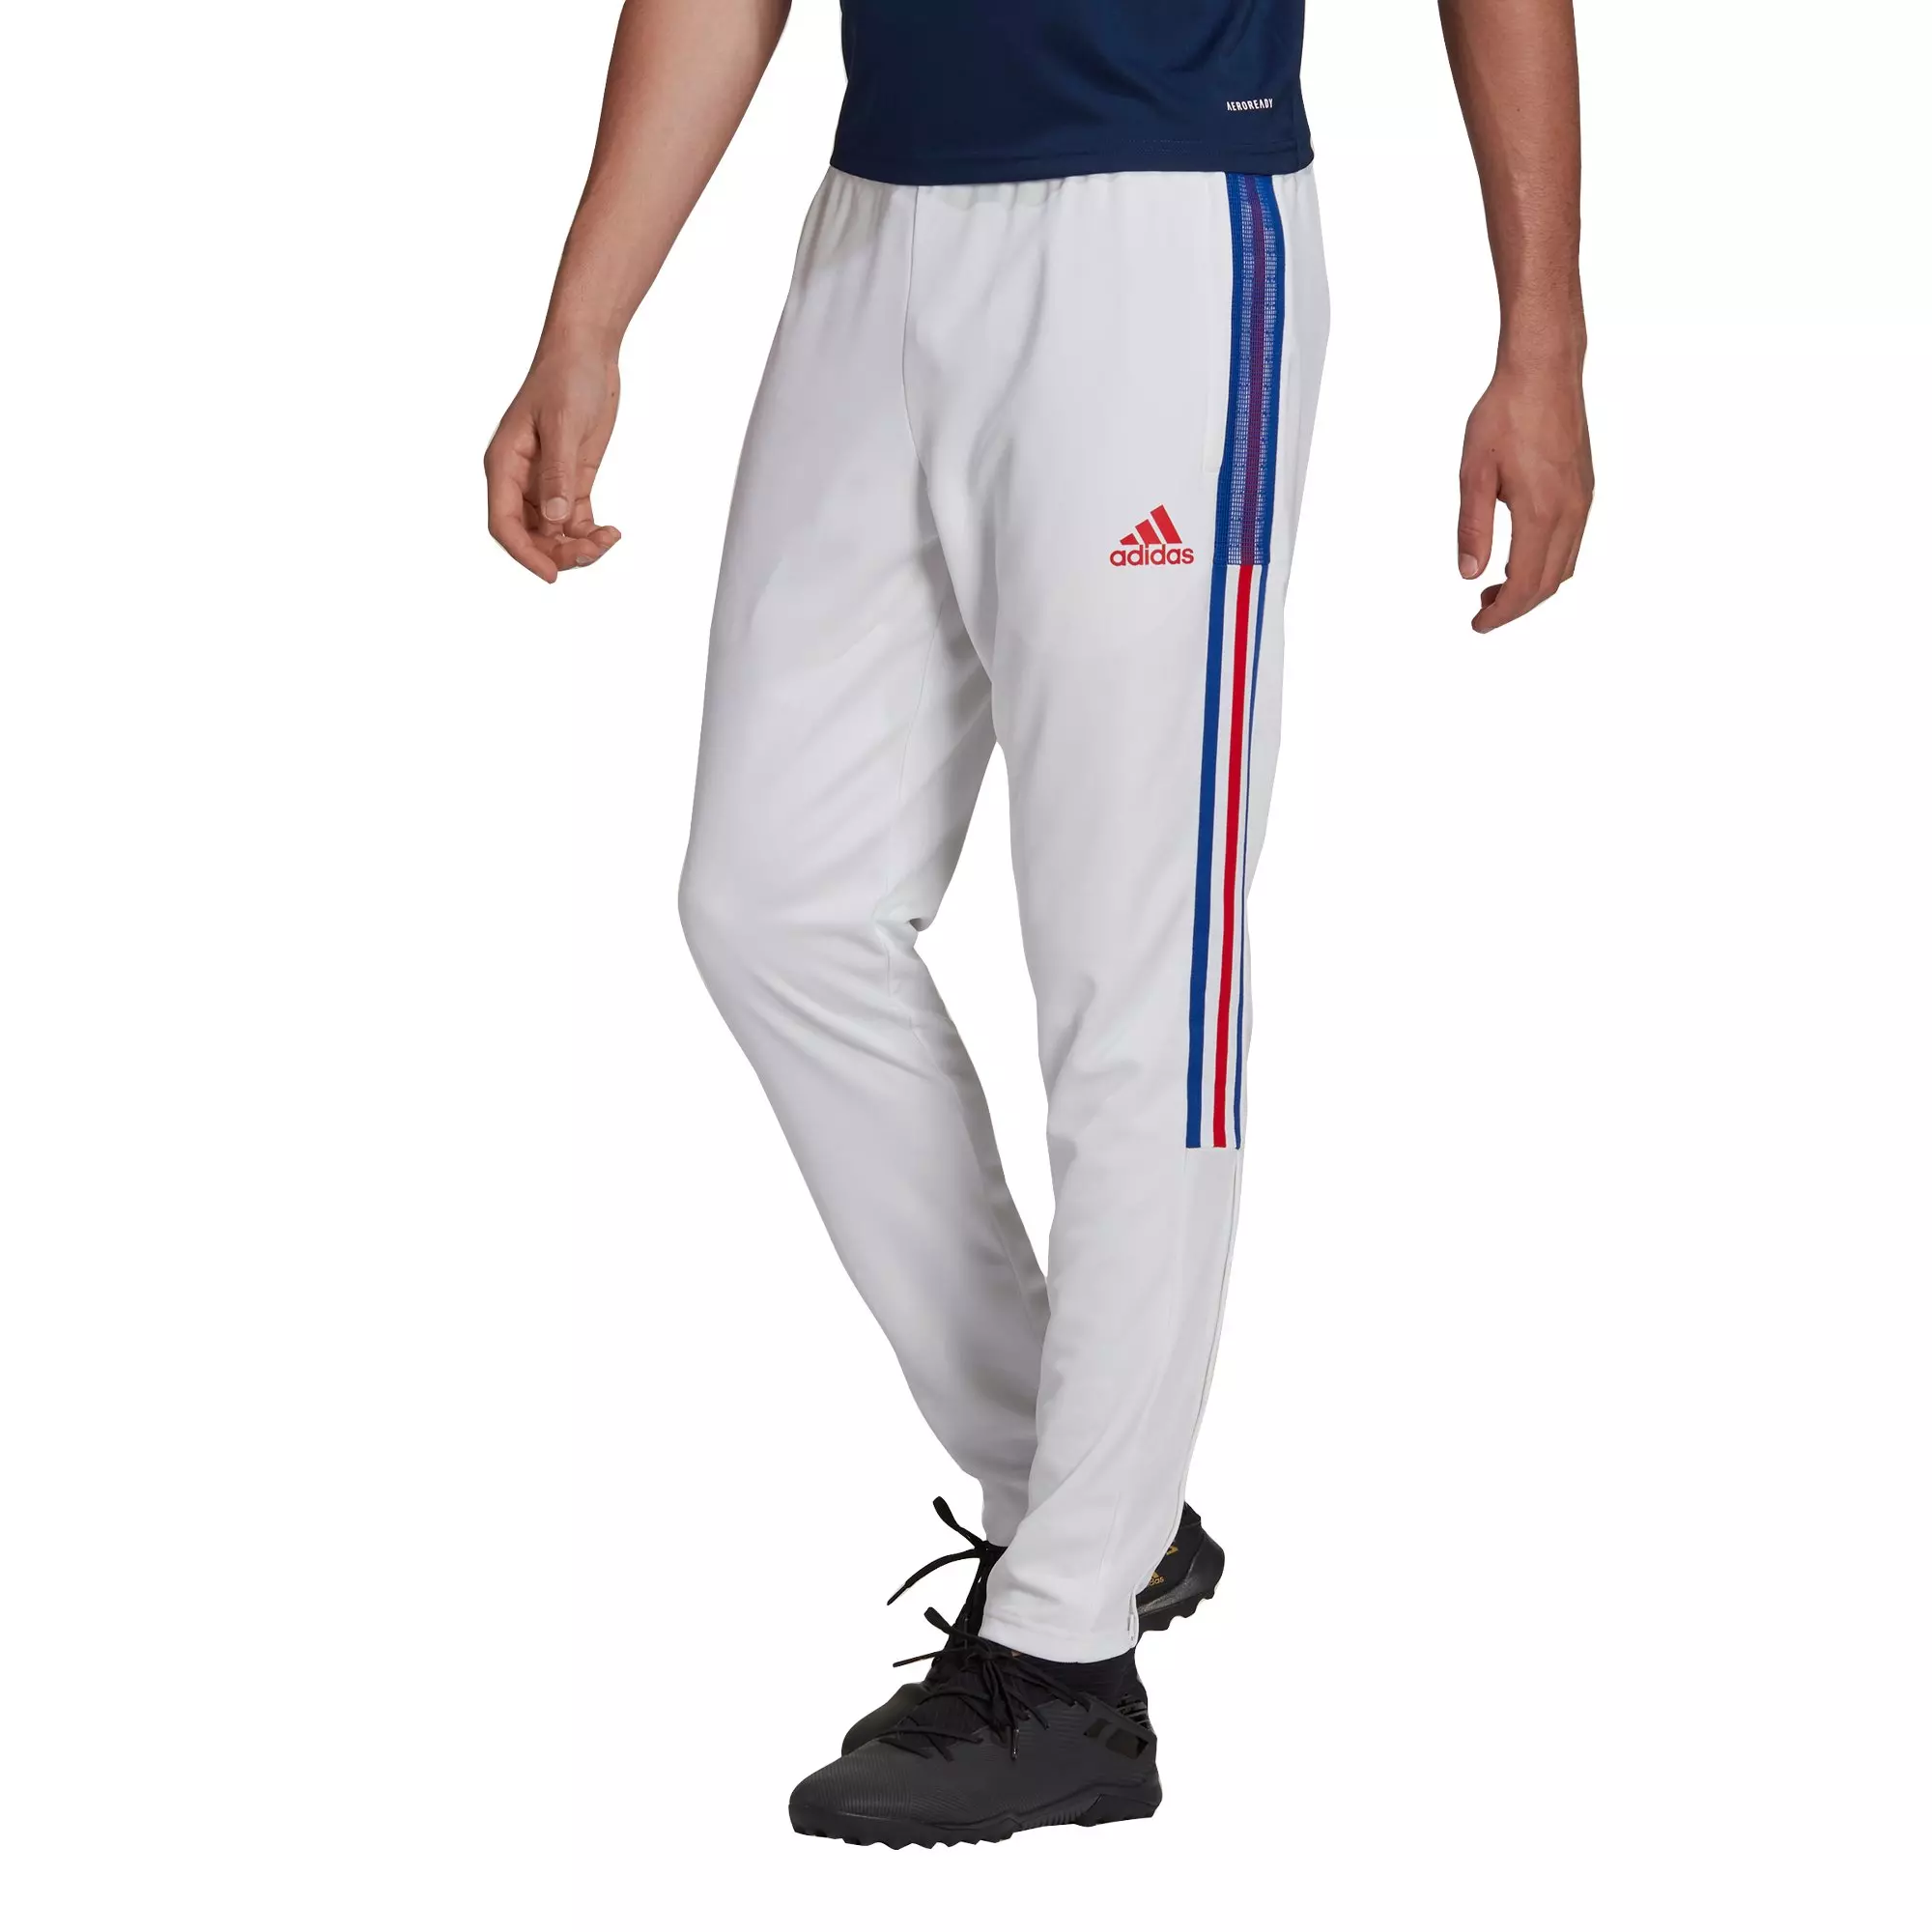 Off The Pitch: Why adidas' Signature Track Pants Are Now a Style Staple